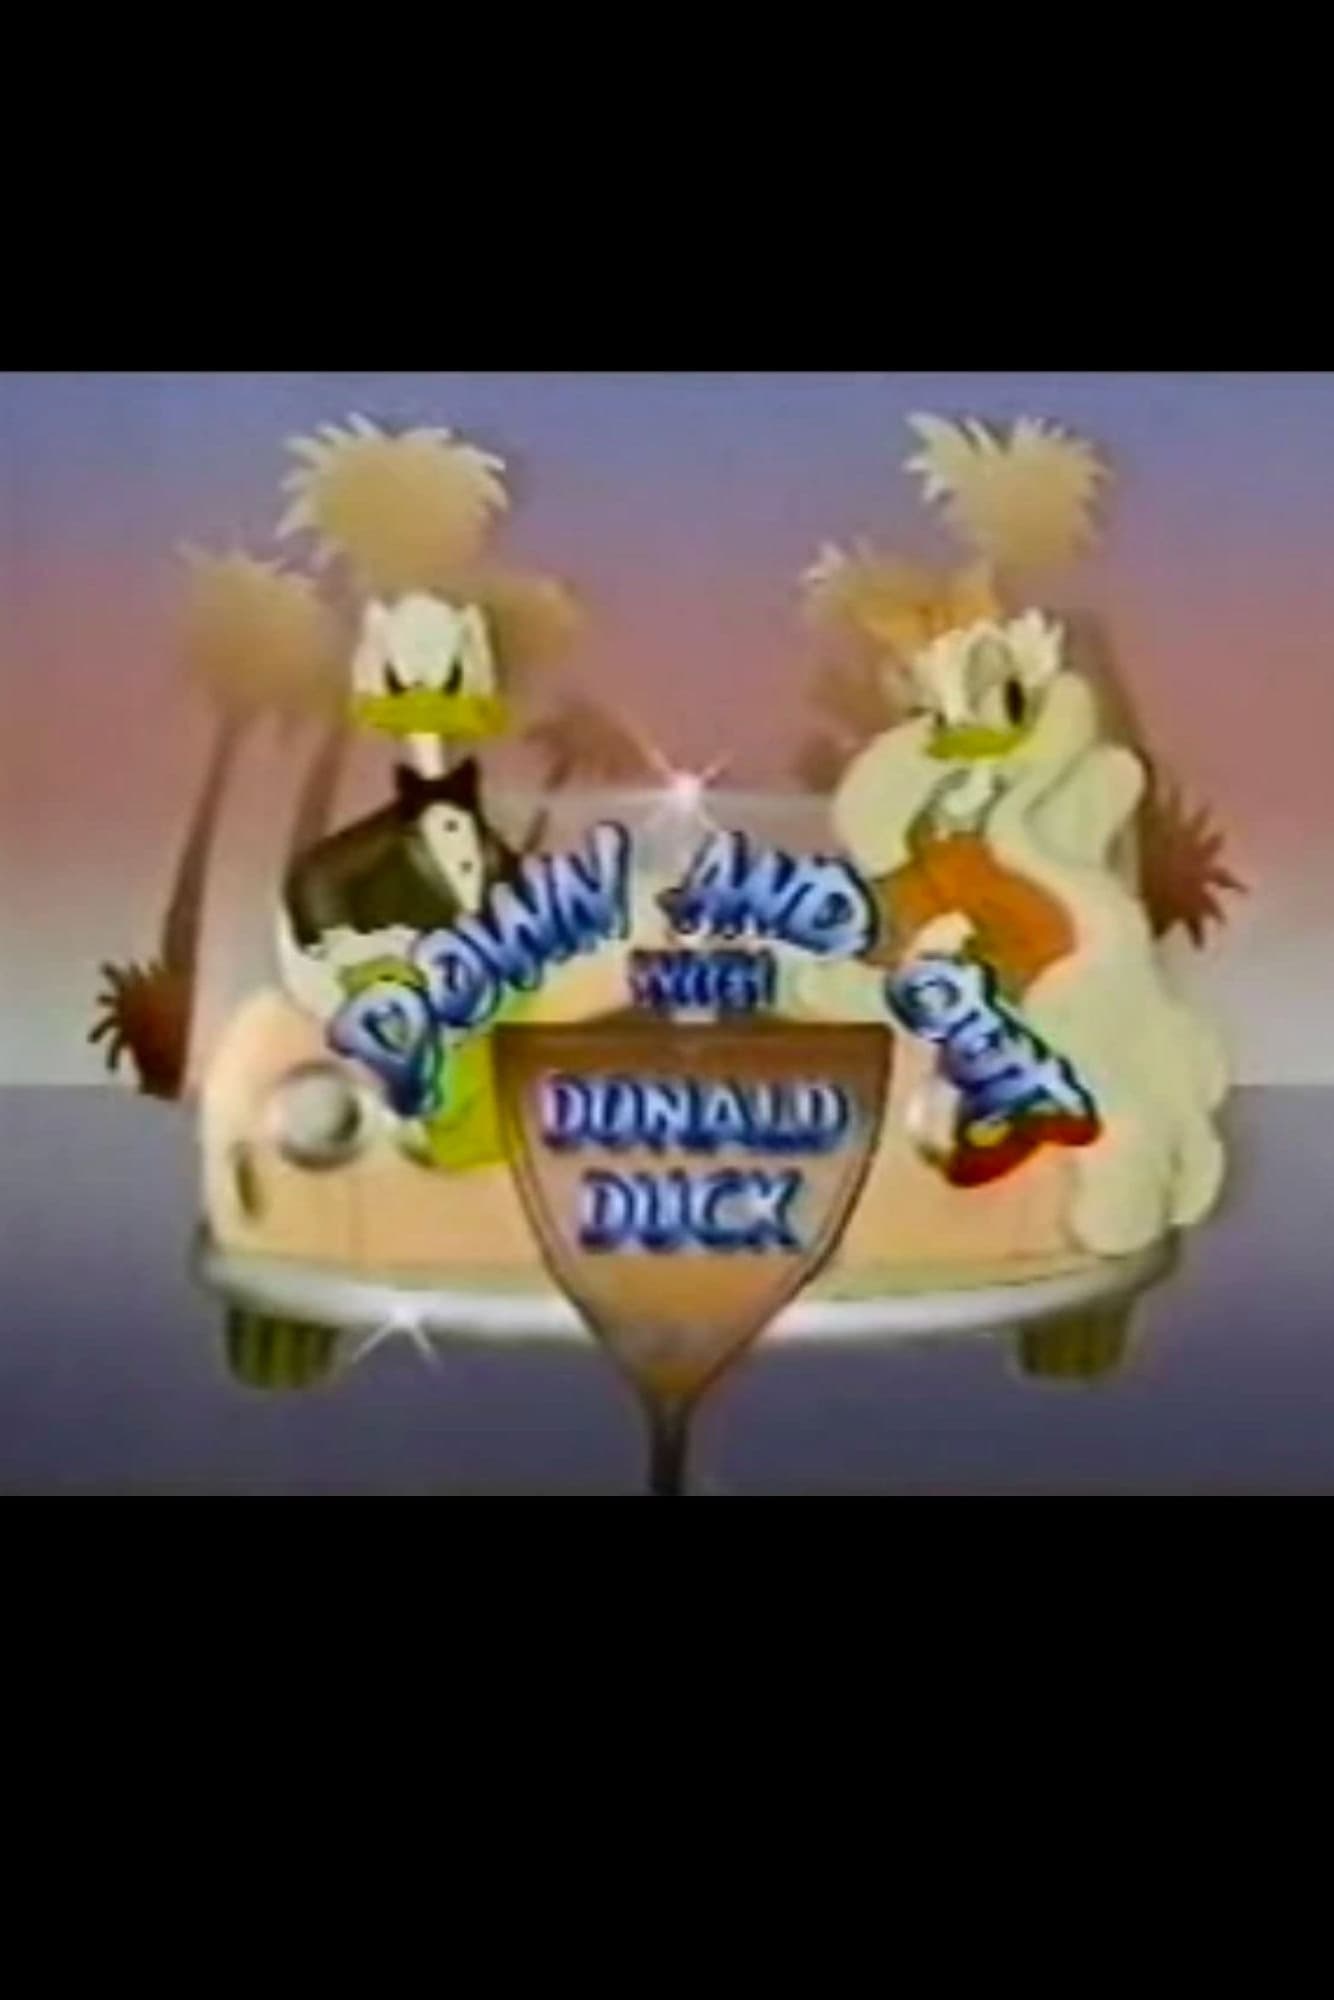 Down and Out with Donald Duck (1987)